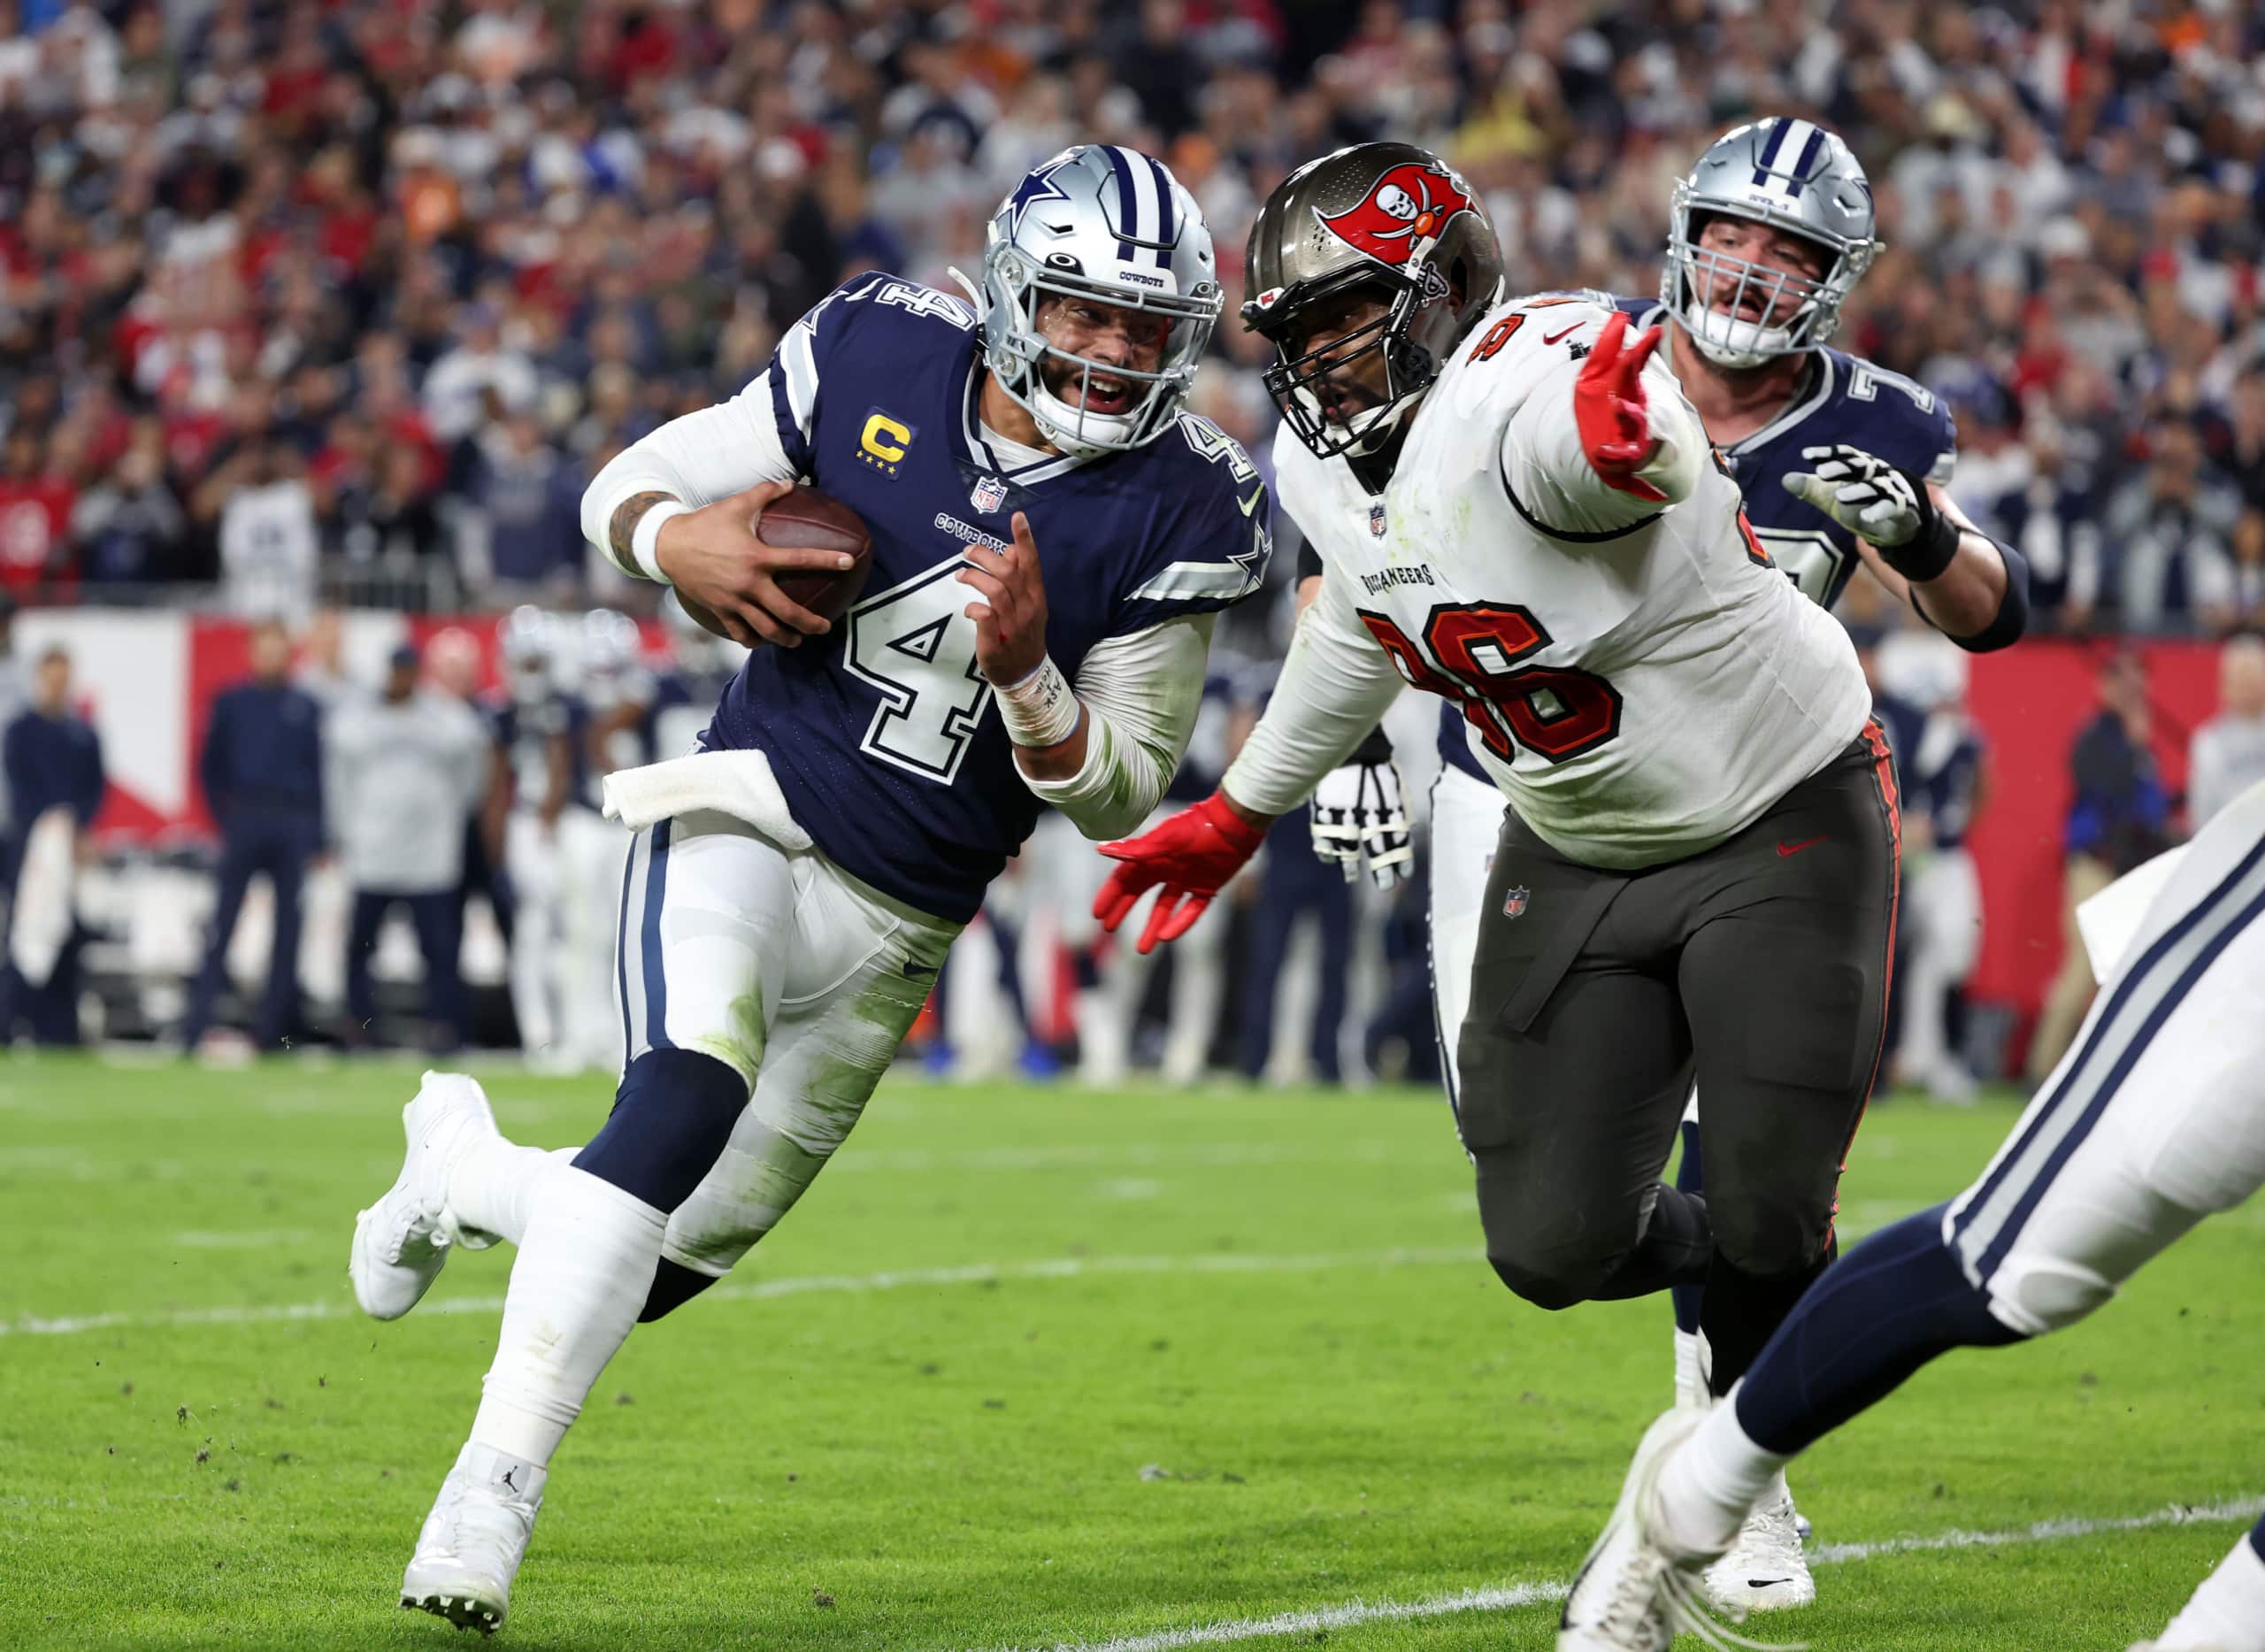 Cowboys vs. Buccaneers 2022 Wild Card game day live discussion III